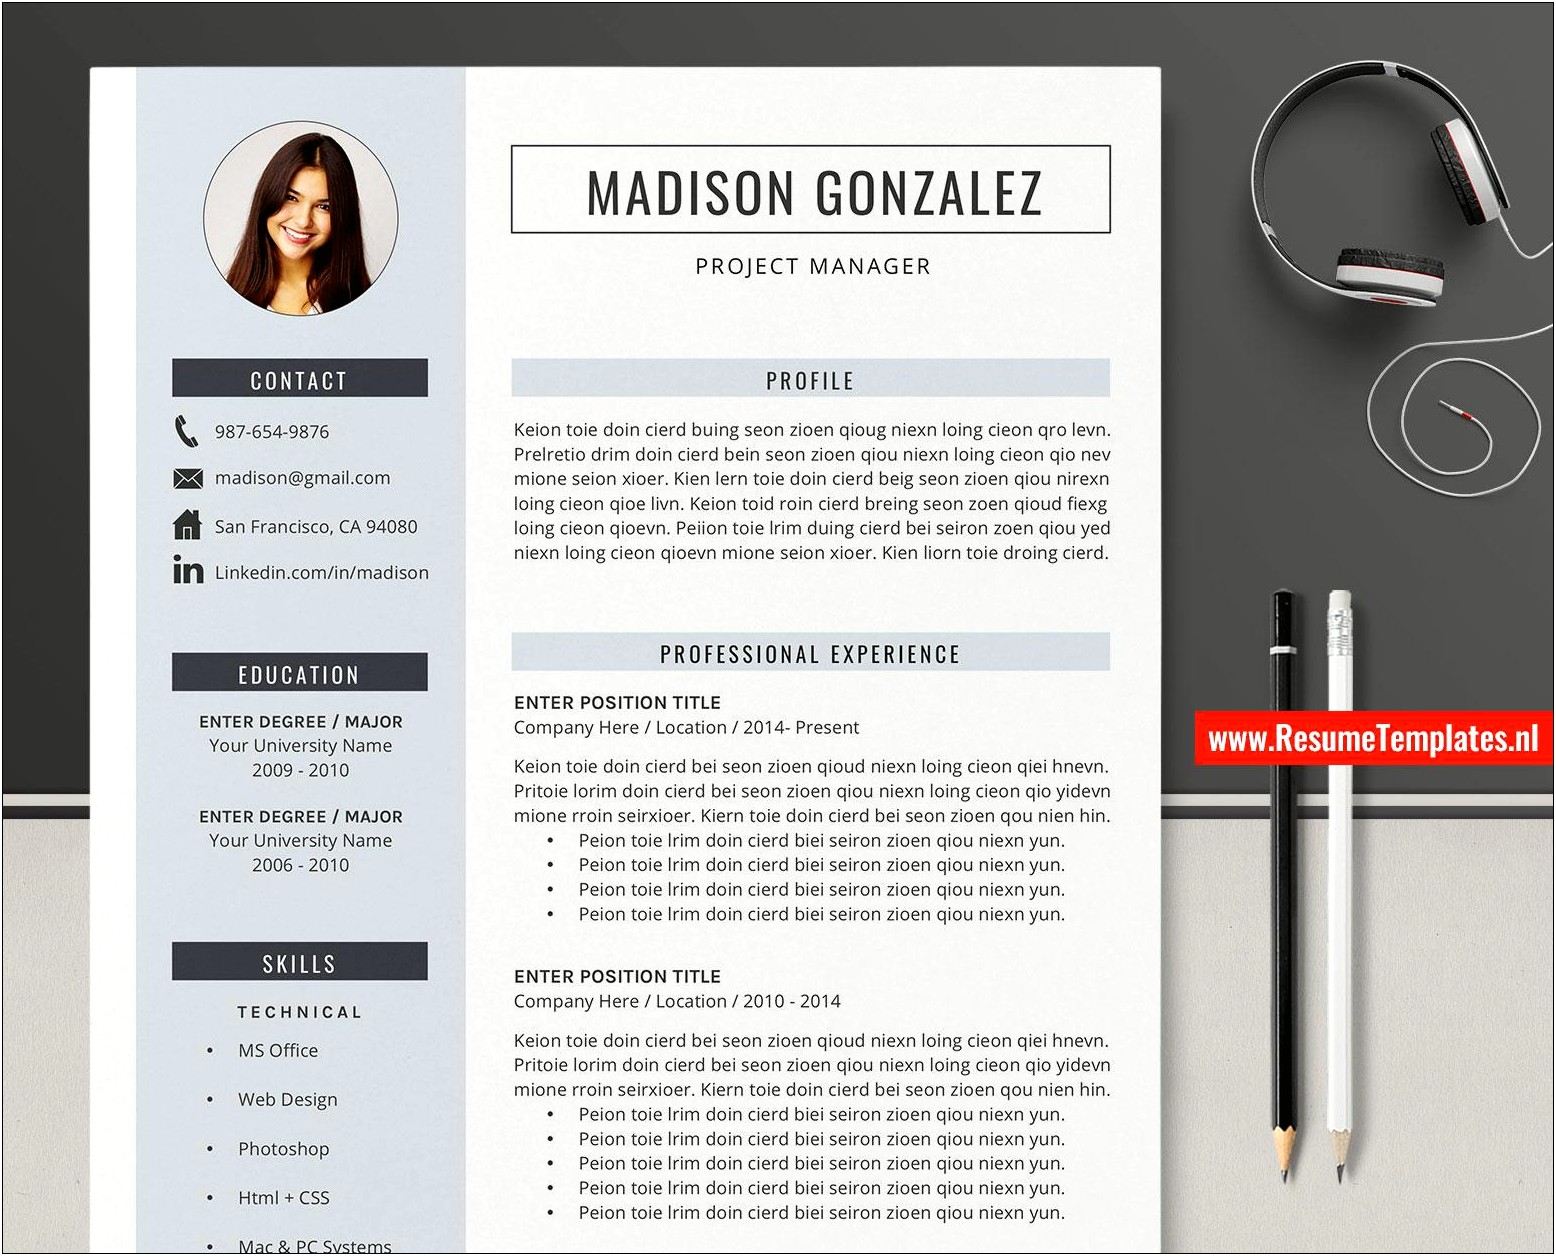 Clean Cv Resume Html Template Download